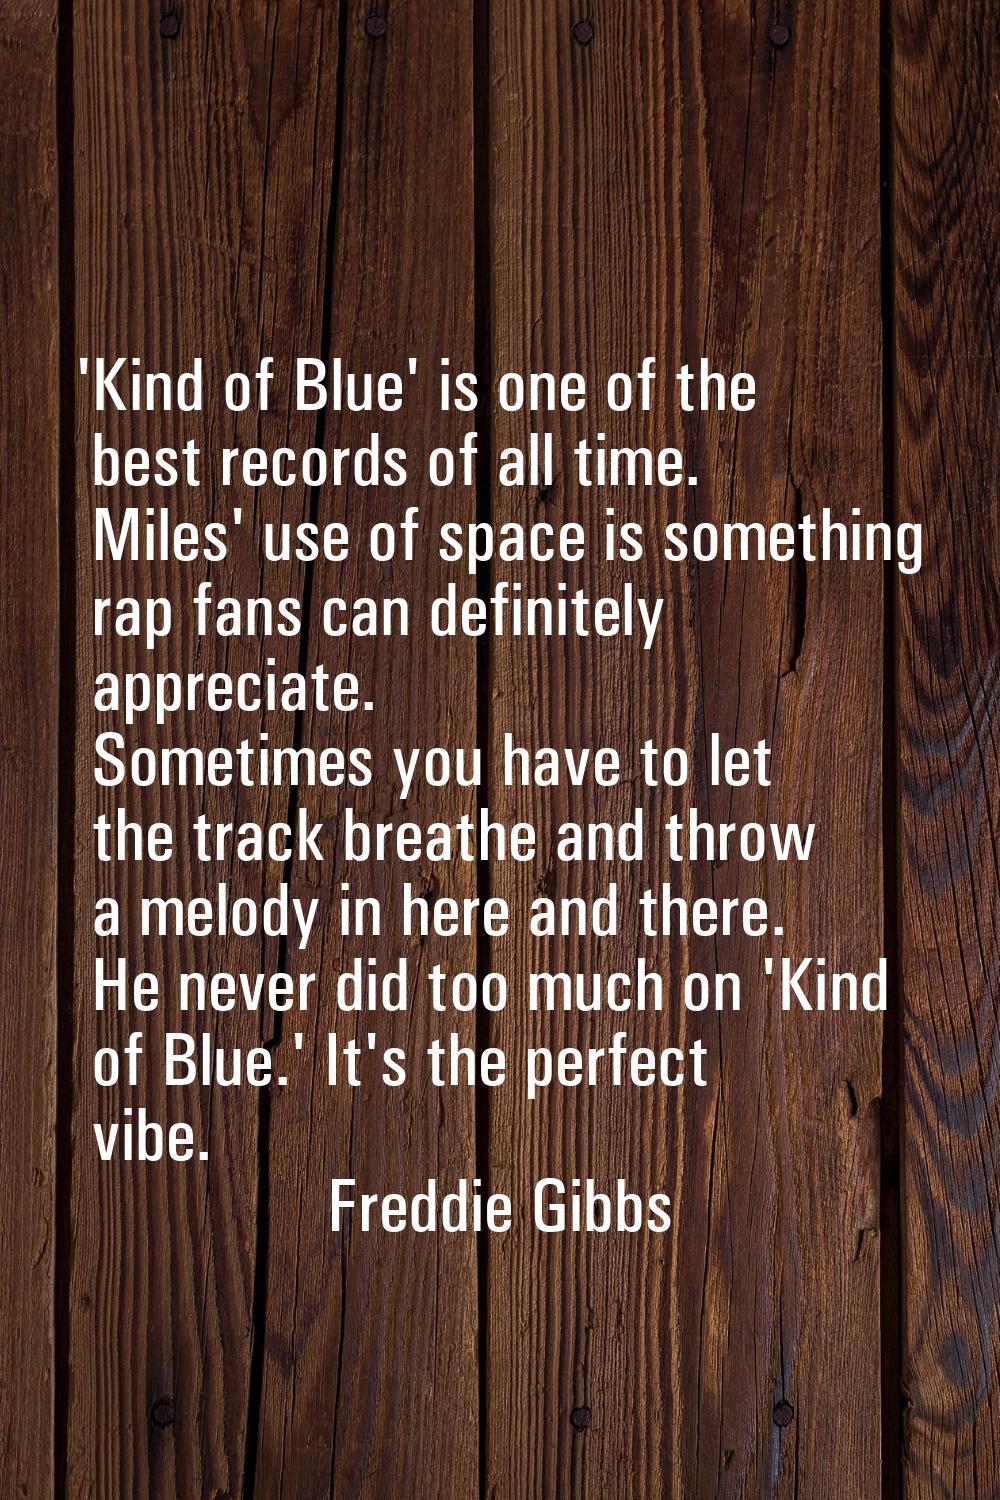 'Kind of Blue' is one of the best records of all time. Miles' use of space is something rap fans ca